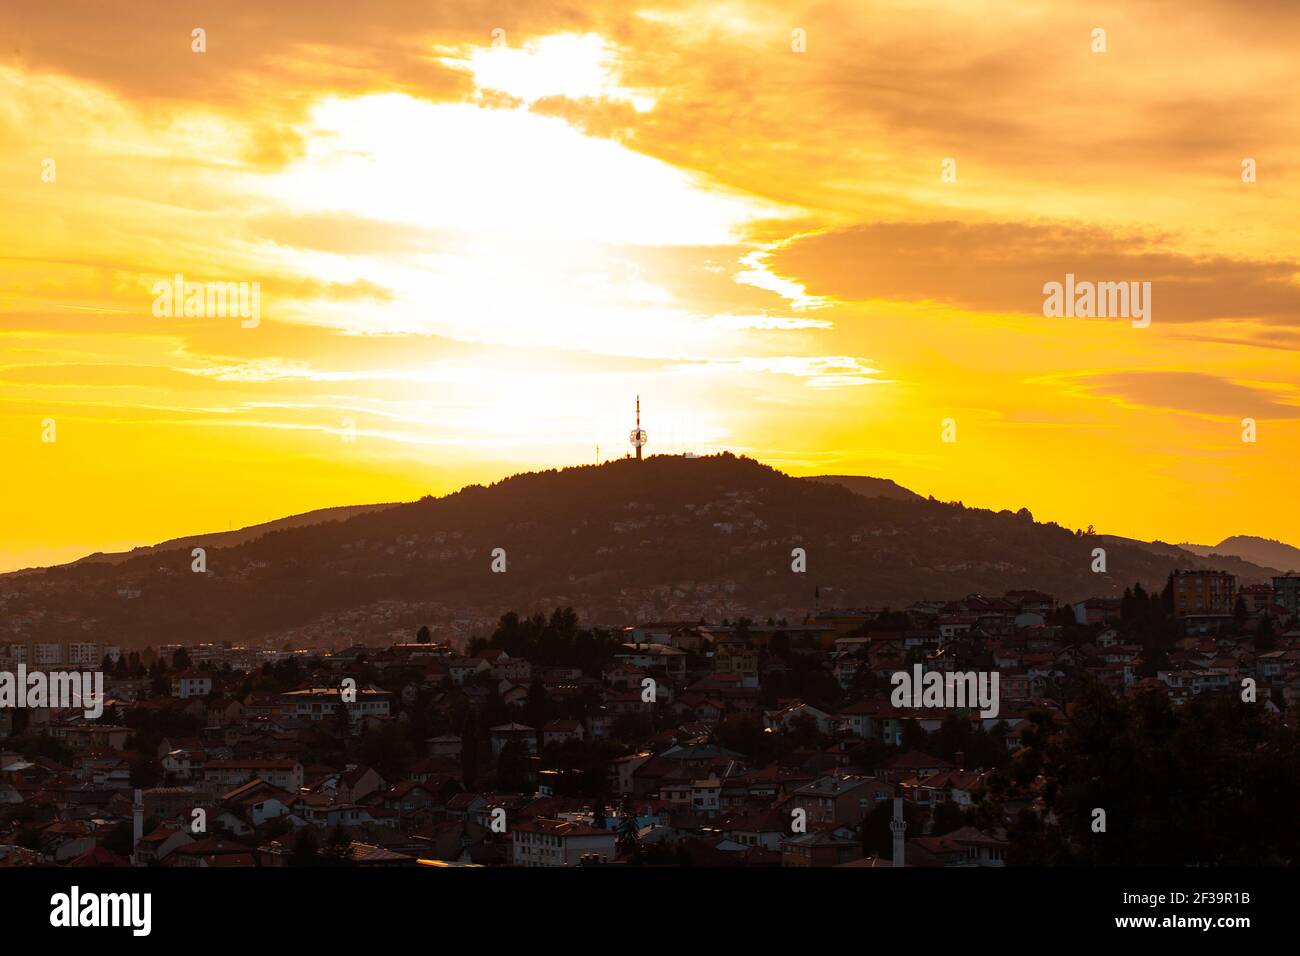 View of Hum Tower located on Mount Hum with Sarajevo cityscape in foreground Stock Photo